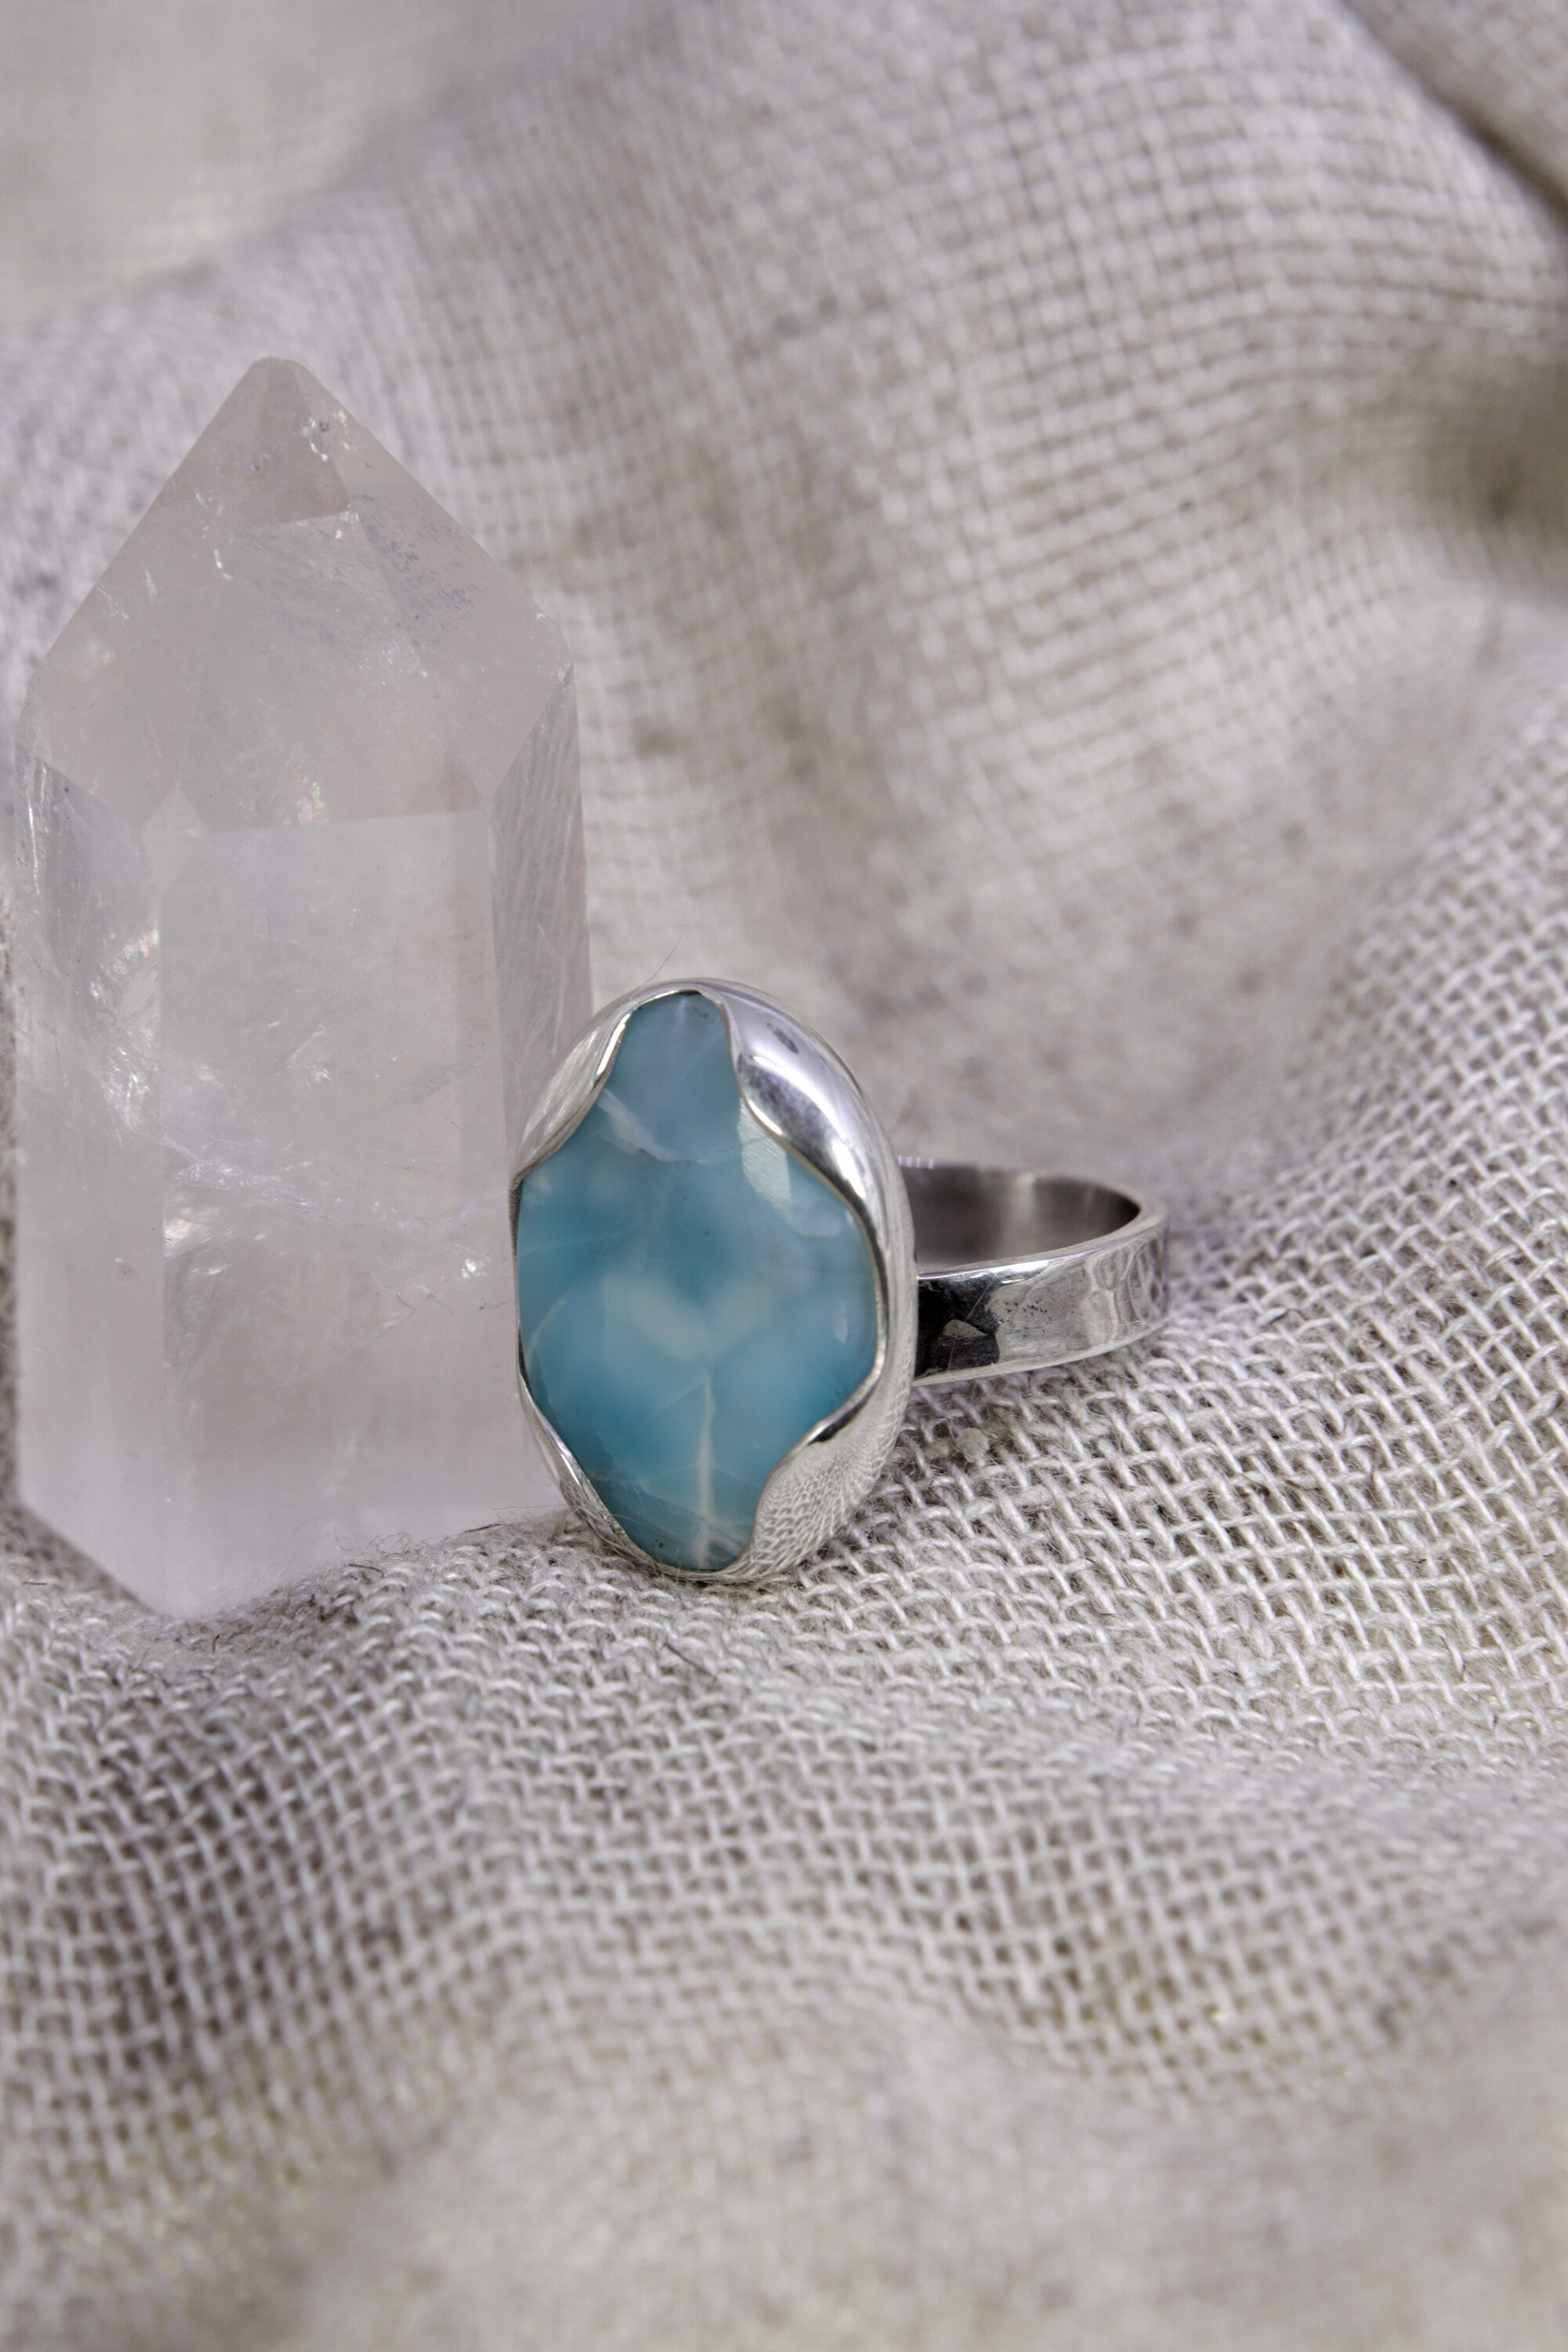 A Tribute to Oceanic Splendor: Adjustable Sterling Silver Ring with Oval Larimar - Unisex - Size 5-12 US - NO/03